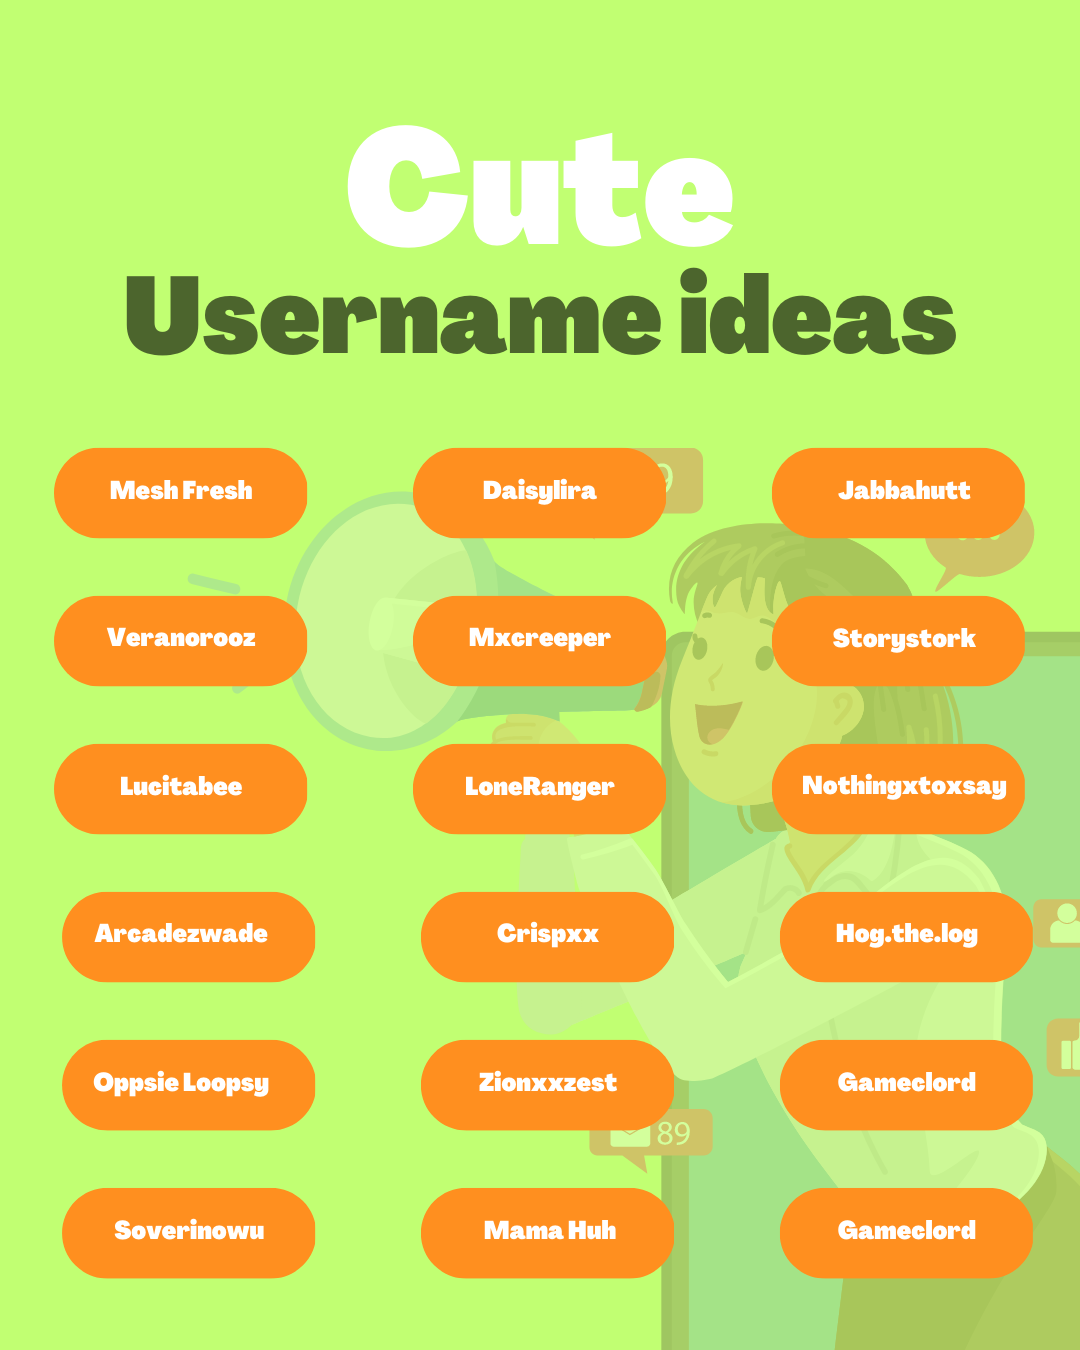 Remote.tools shares a list of cute username ideas for your social media profiles.